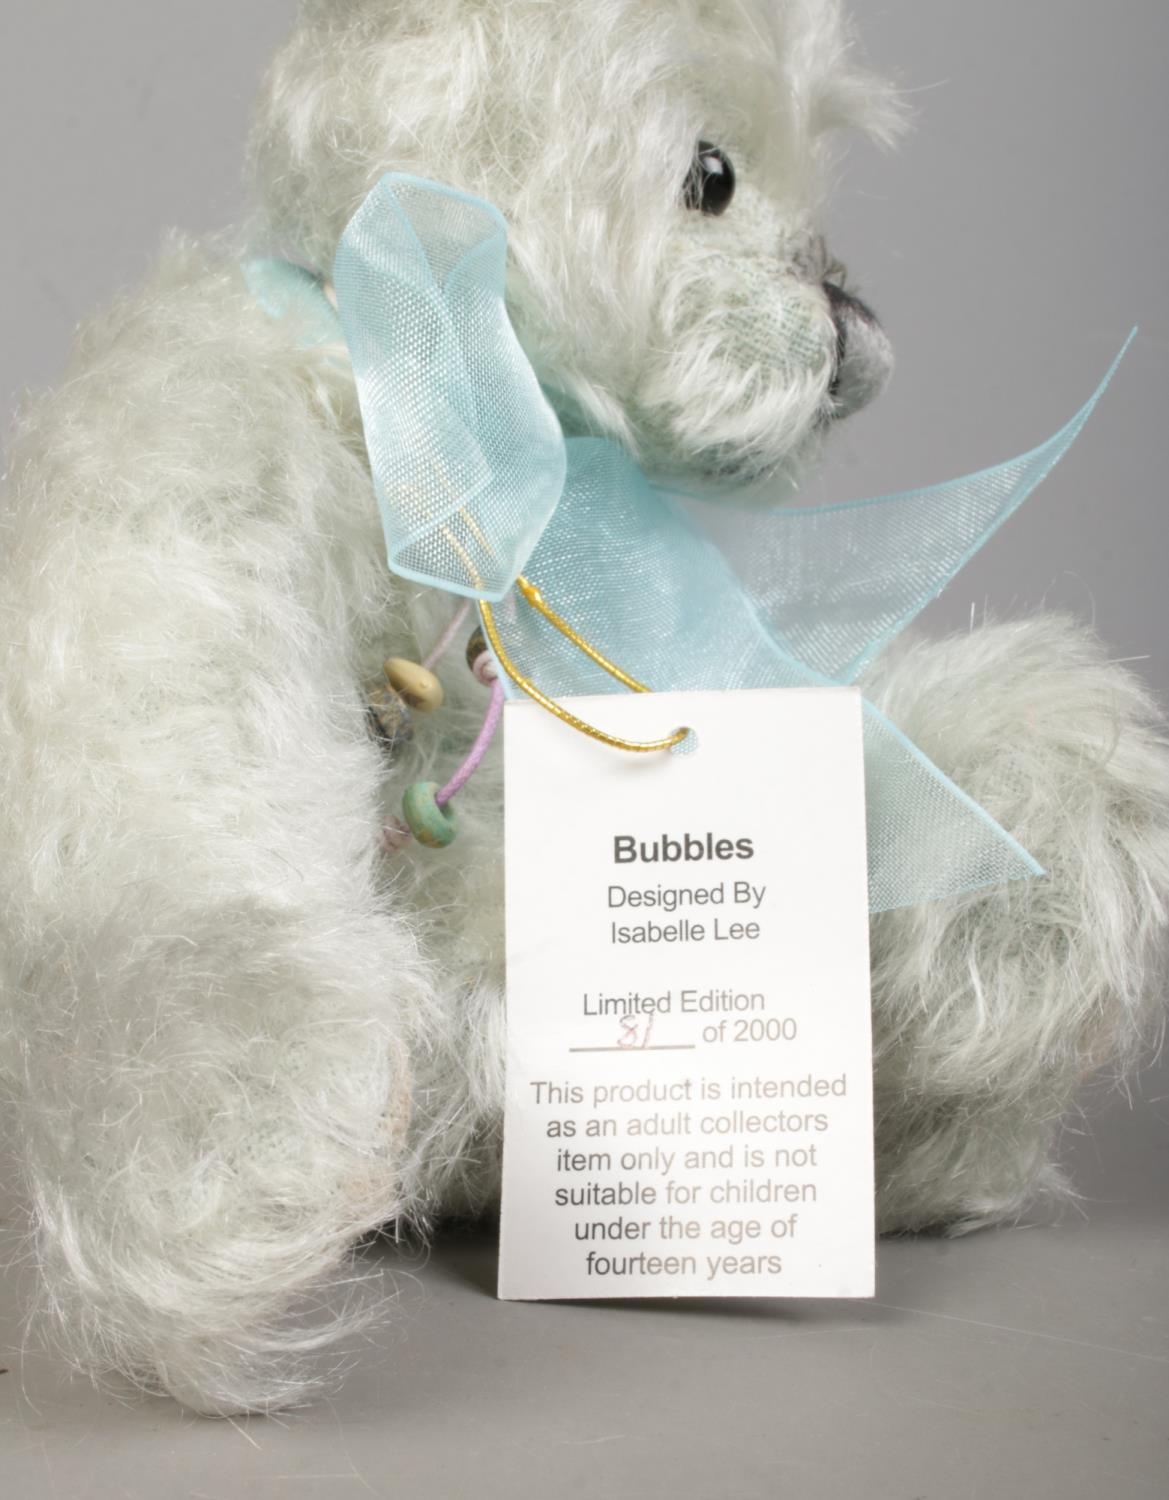 A Limited Edition Charlie Bears jointed teddy bear, Bubbles, from the Minimo collection. 81/2000. - Image 2 of 2